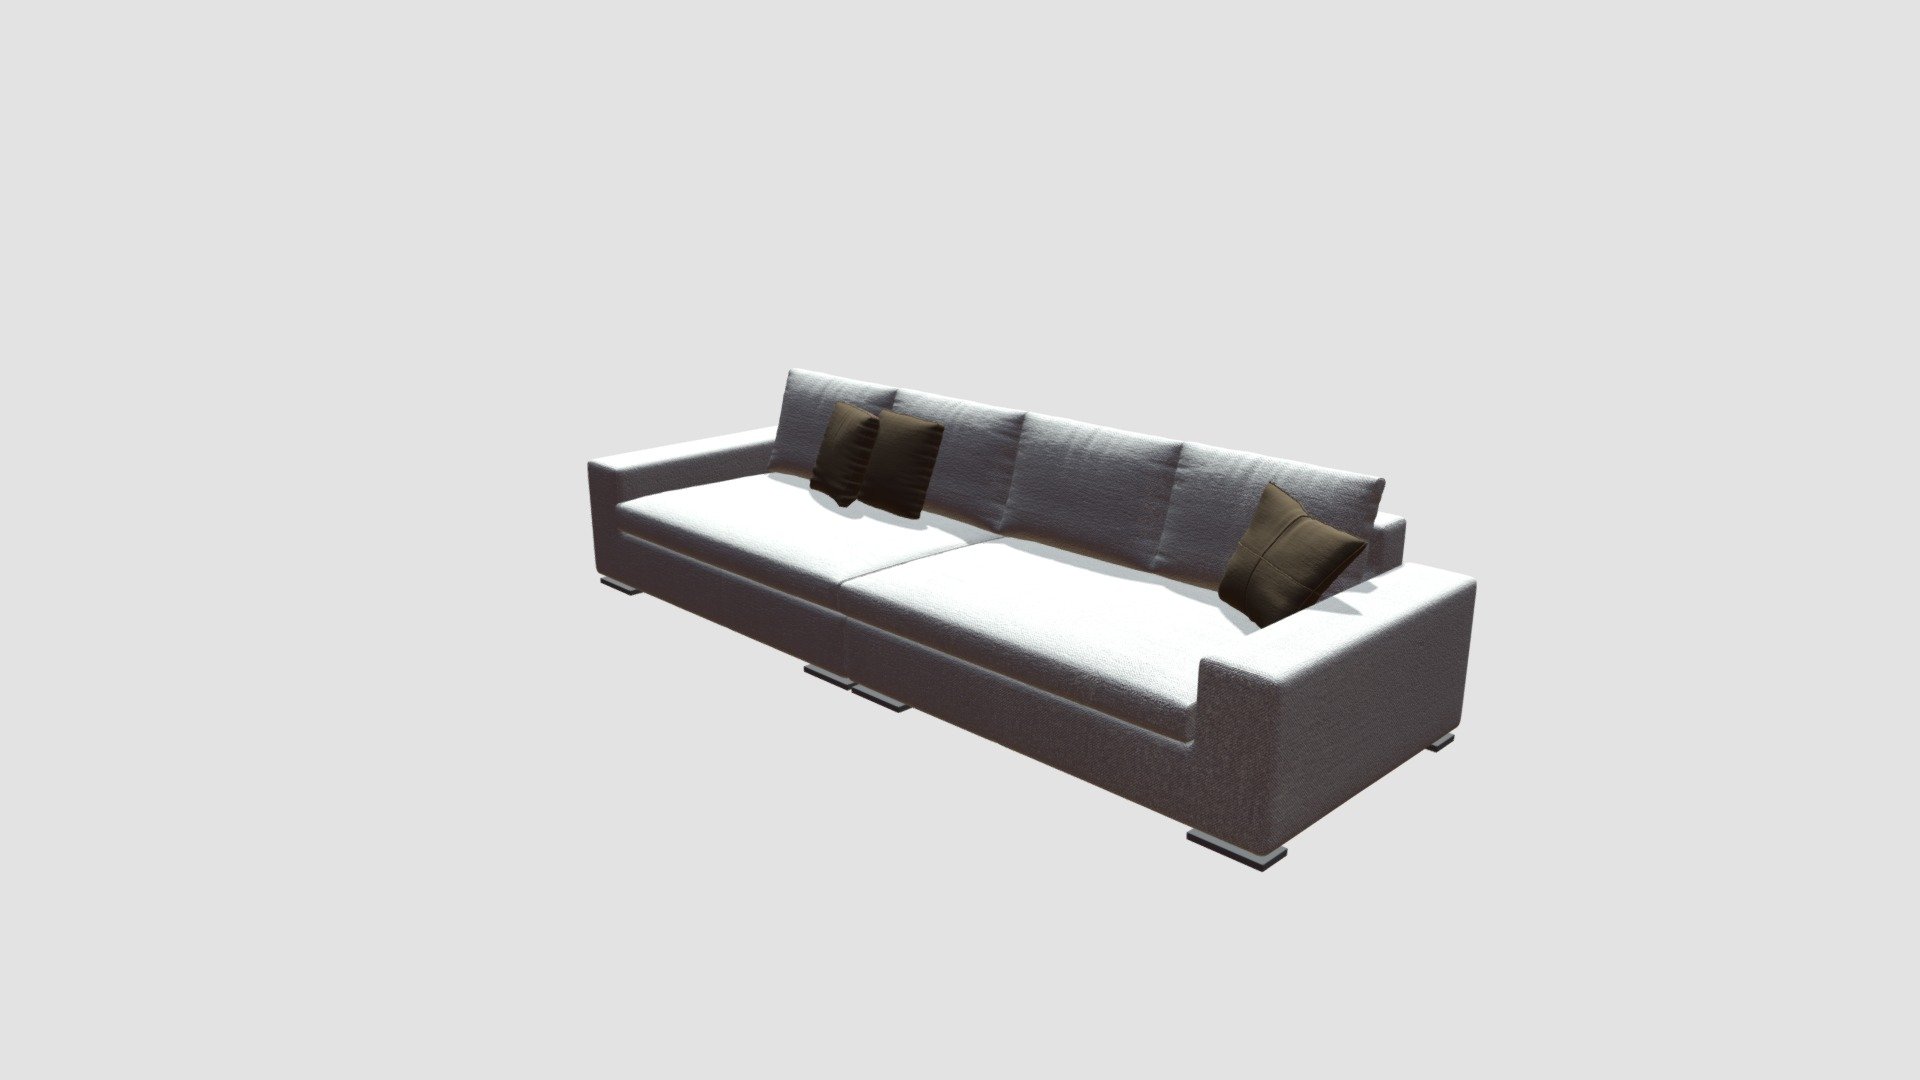 Highly detailed 3d model of sofa with all textures, shaders and materials. It is ready to use, just put it into your scene 3d model